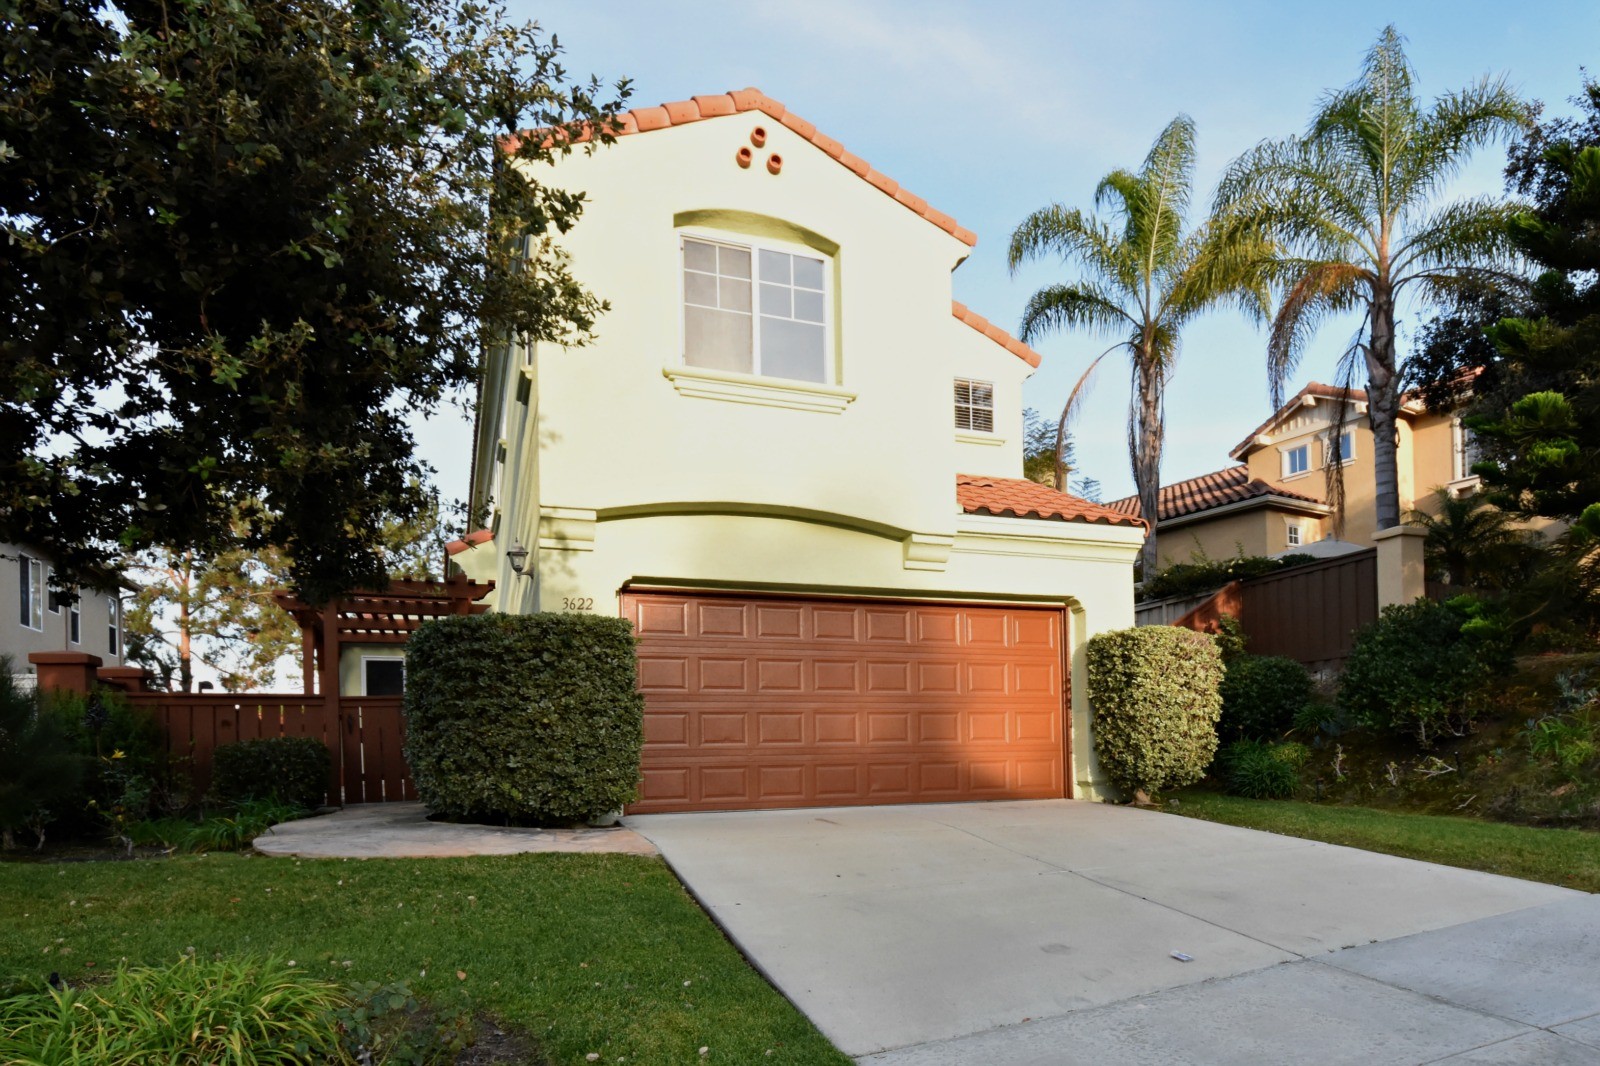 3622 PROMONTORY PLACE, CARLSBAD, CA 92010